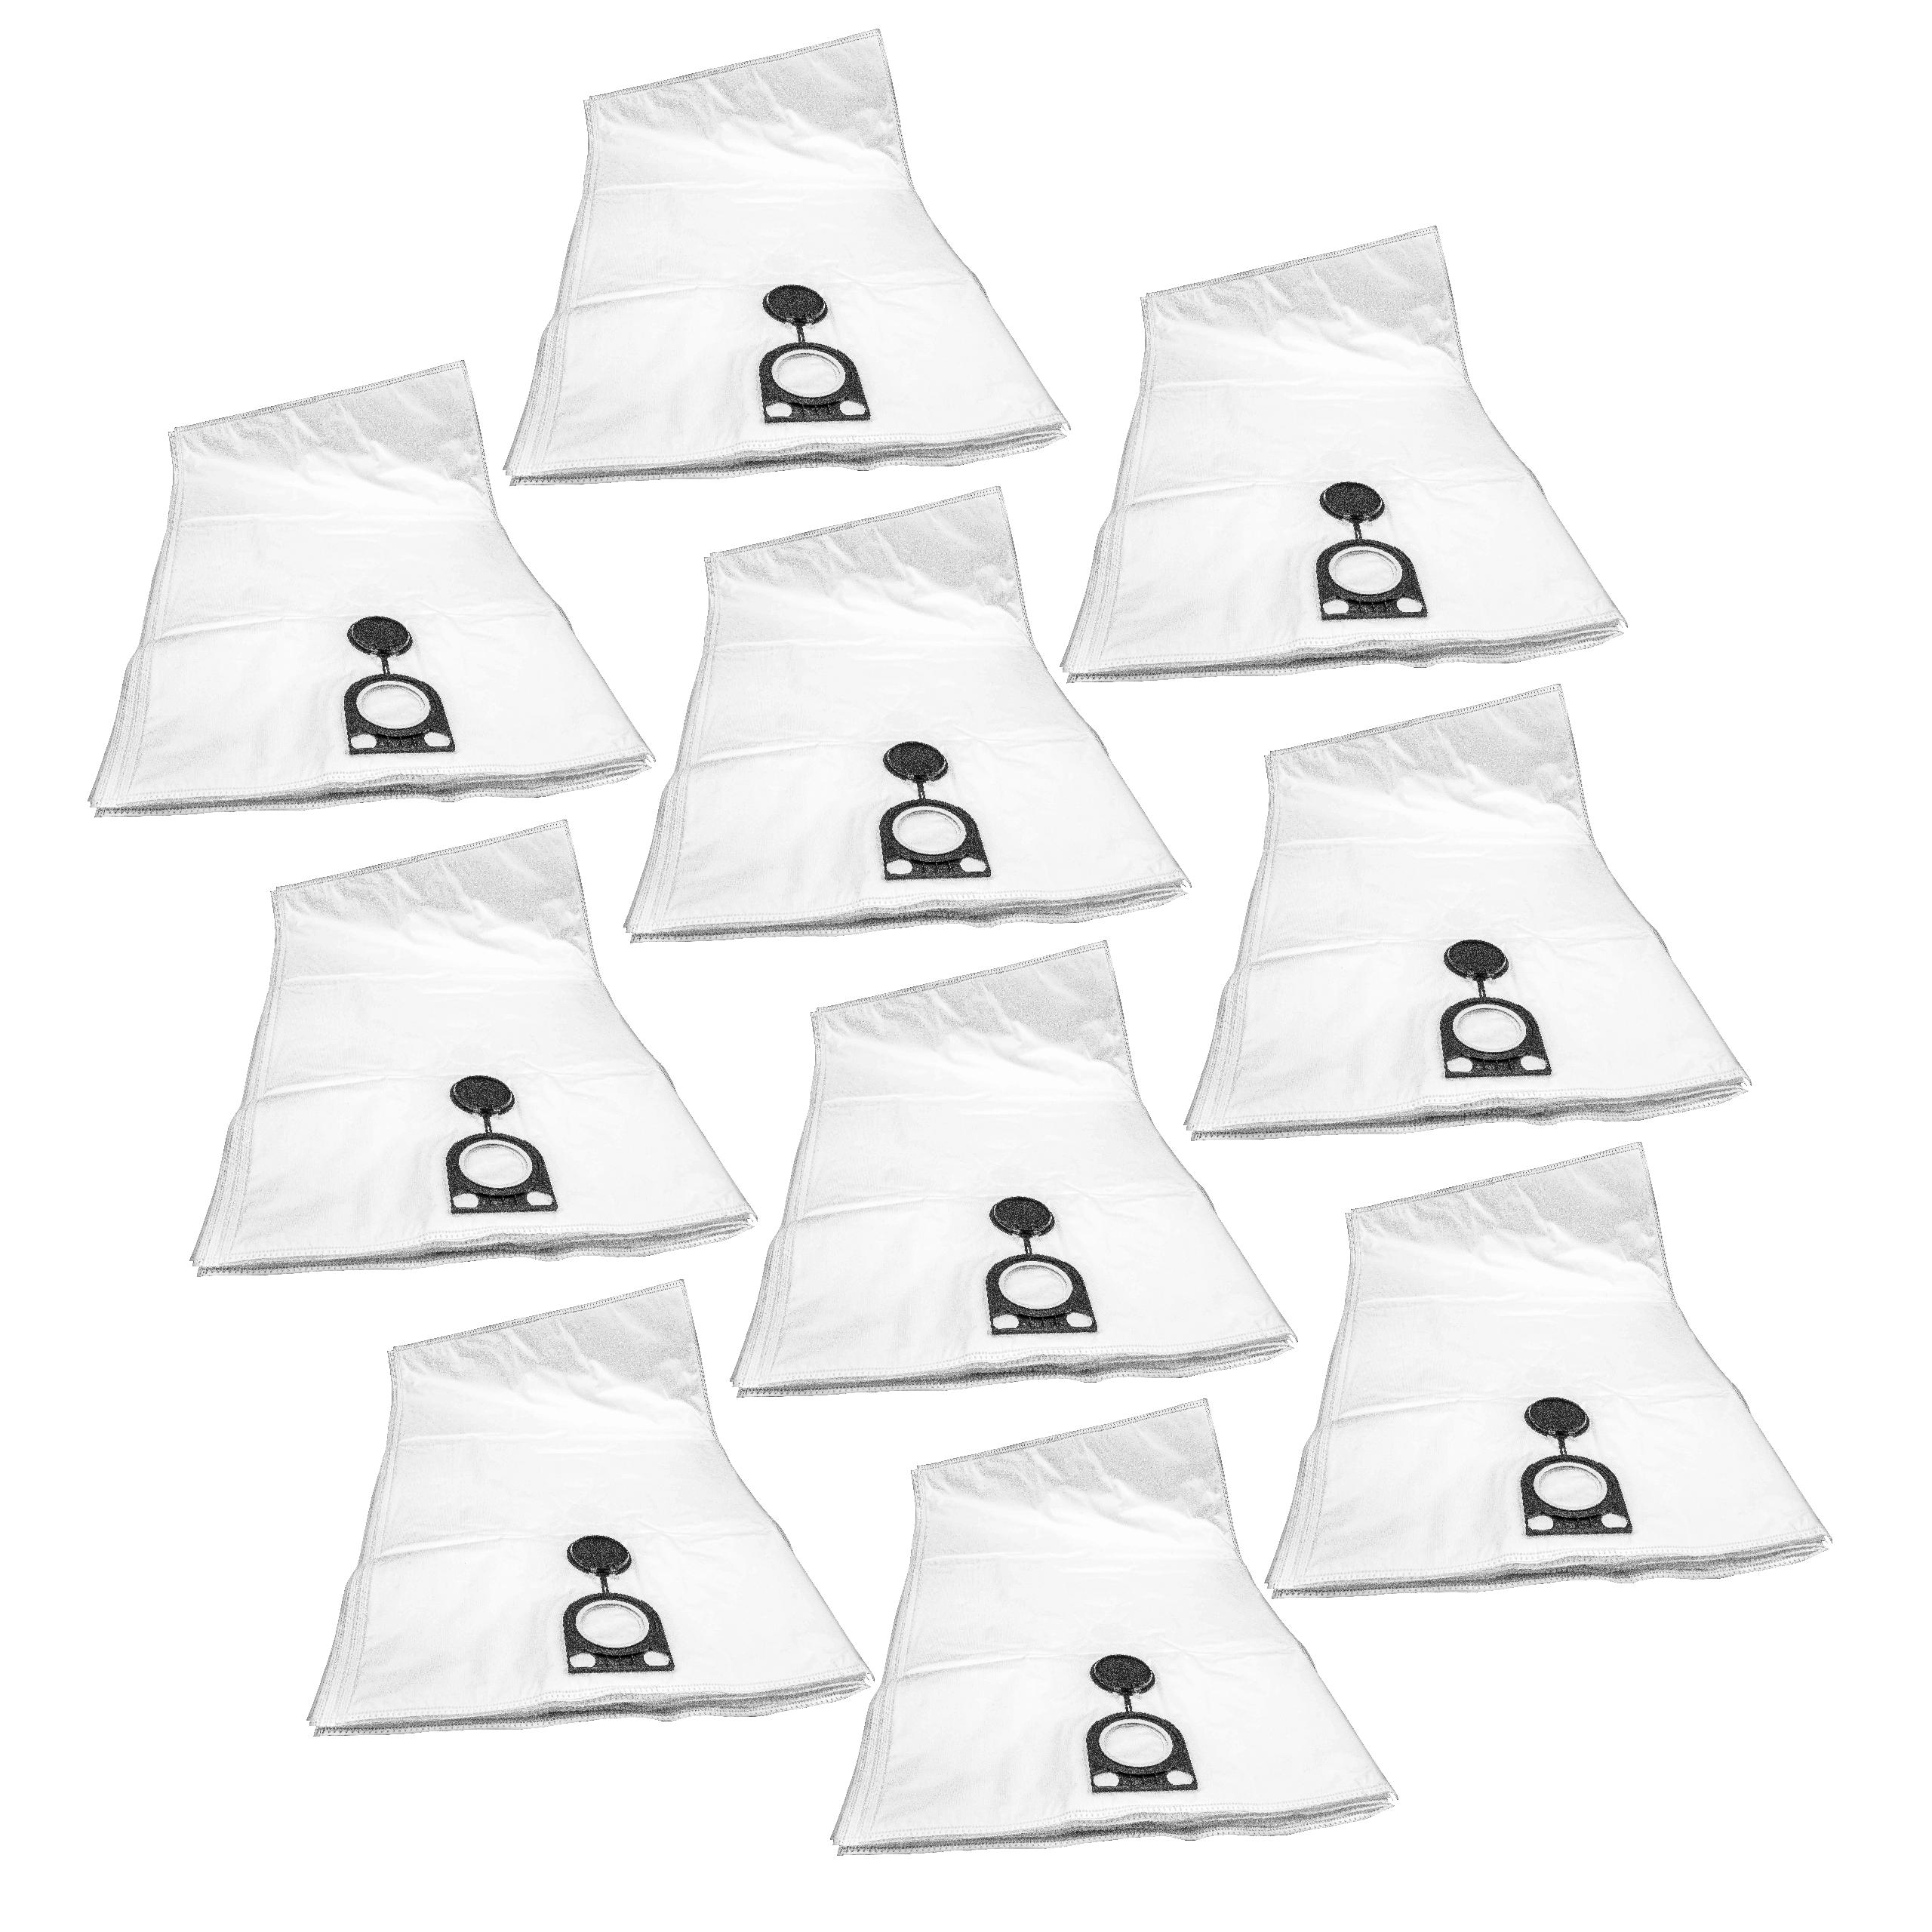 50x Vacuum Cleaner Bag replaces Bosch 2607432037 for Bosch - microfleece